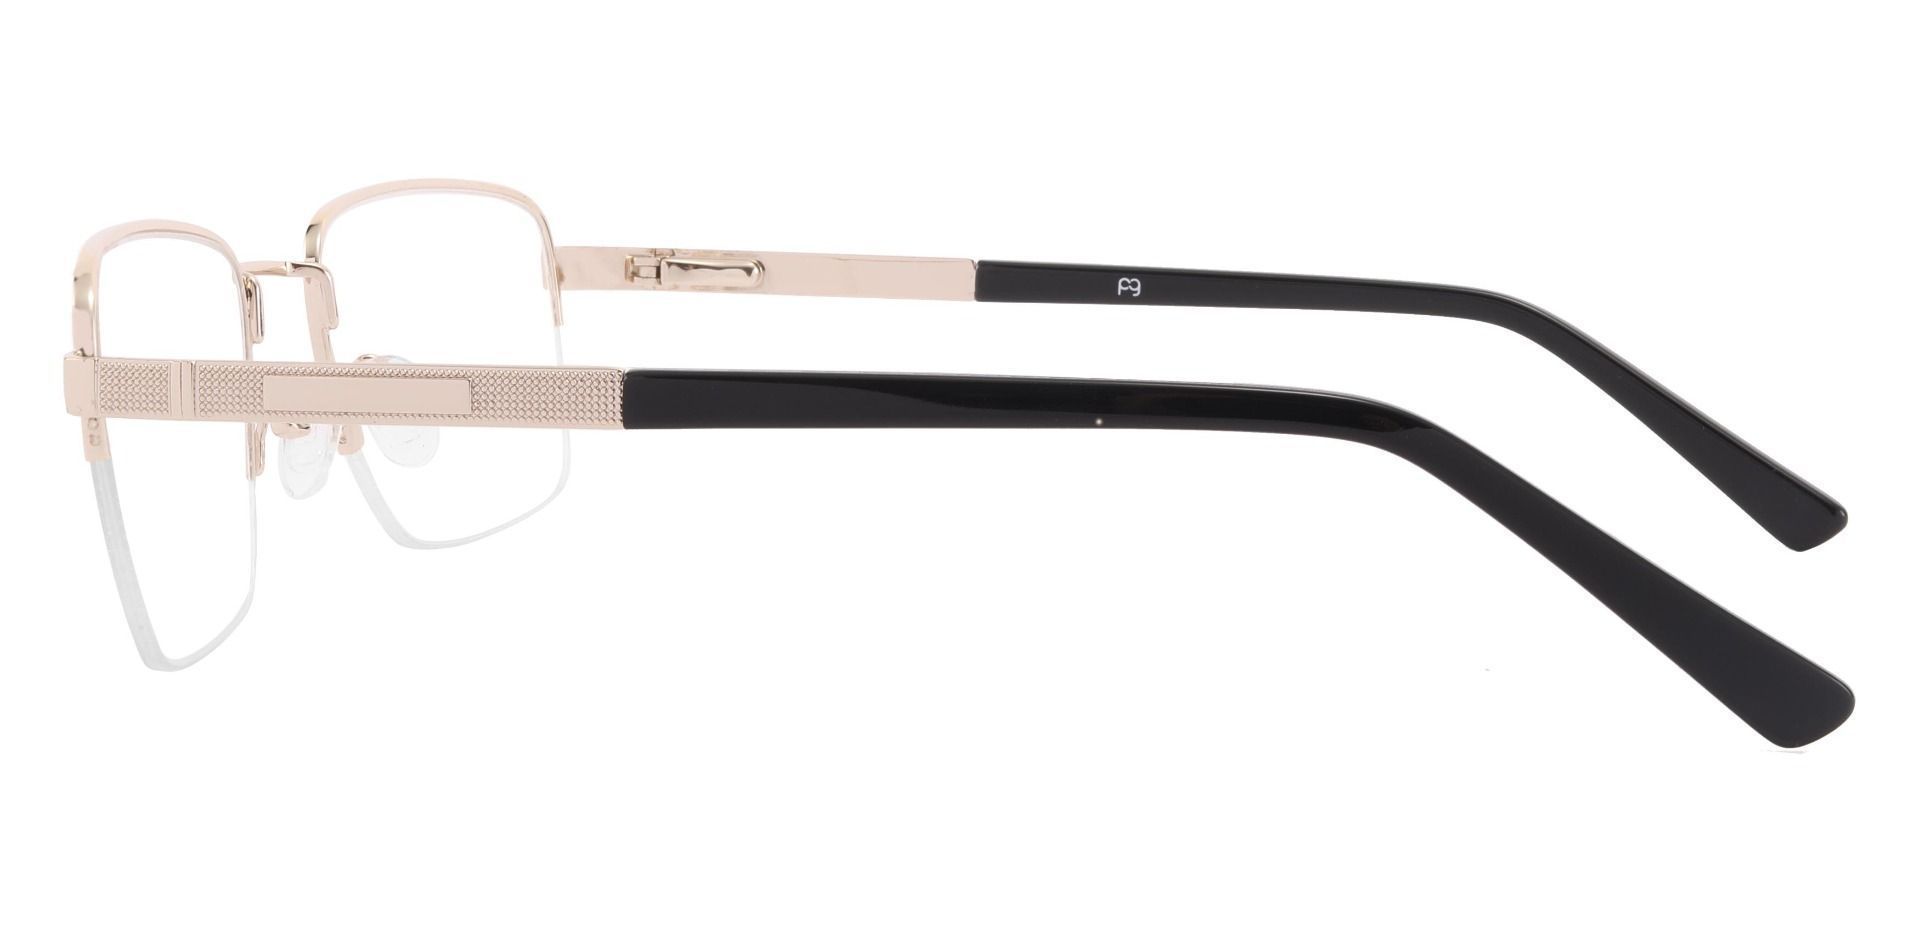 Weston Rectangle Lined Bifocal Glasses - Gold